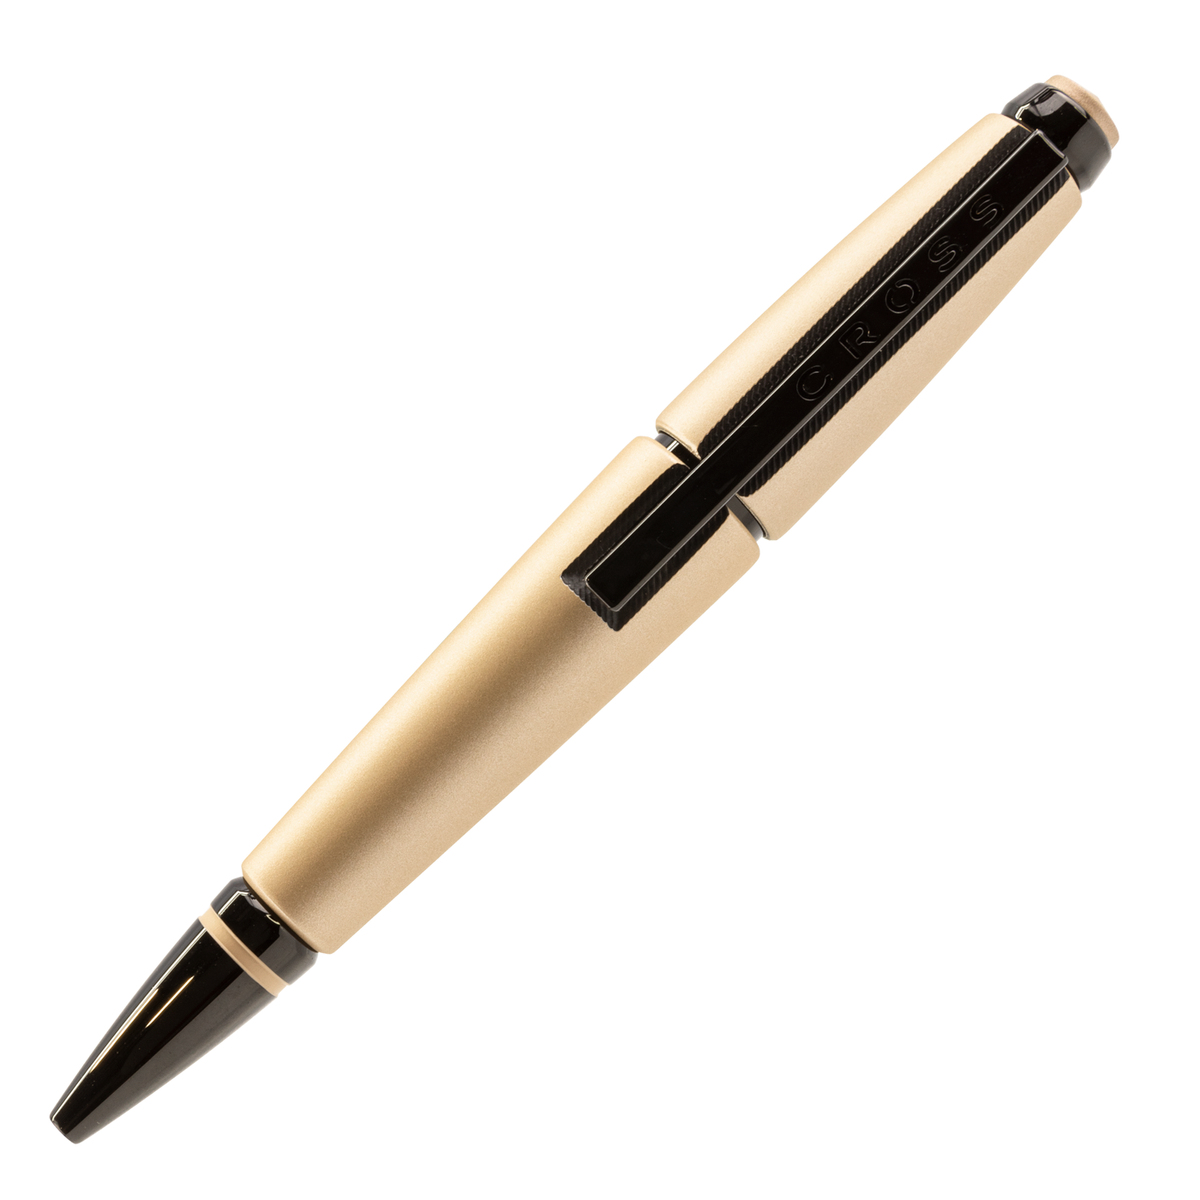 The Cross Edge capless rollerball pen in Light Brown Matte with black clip and appointments combines performance and practicality with play-ability. Just slide it open, unleash your thoughts, and then snap it shut.